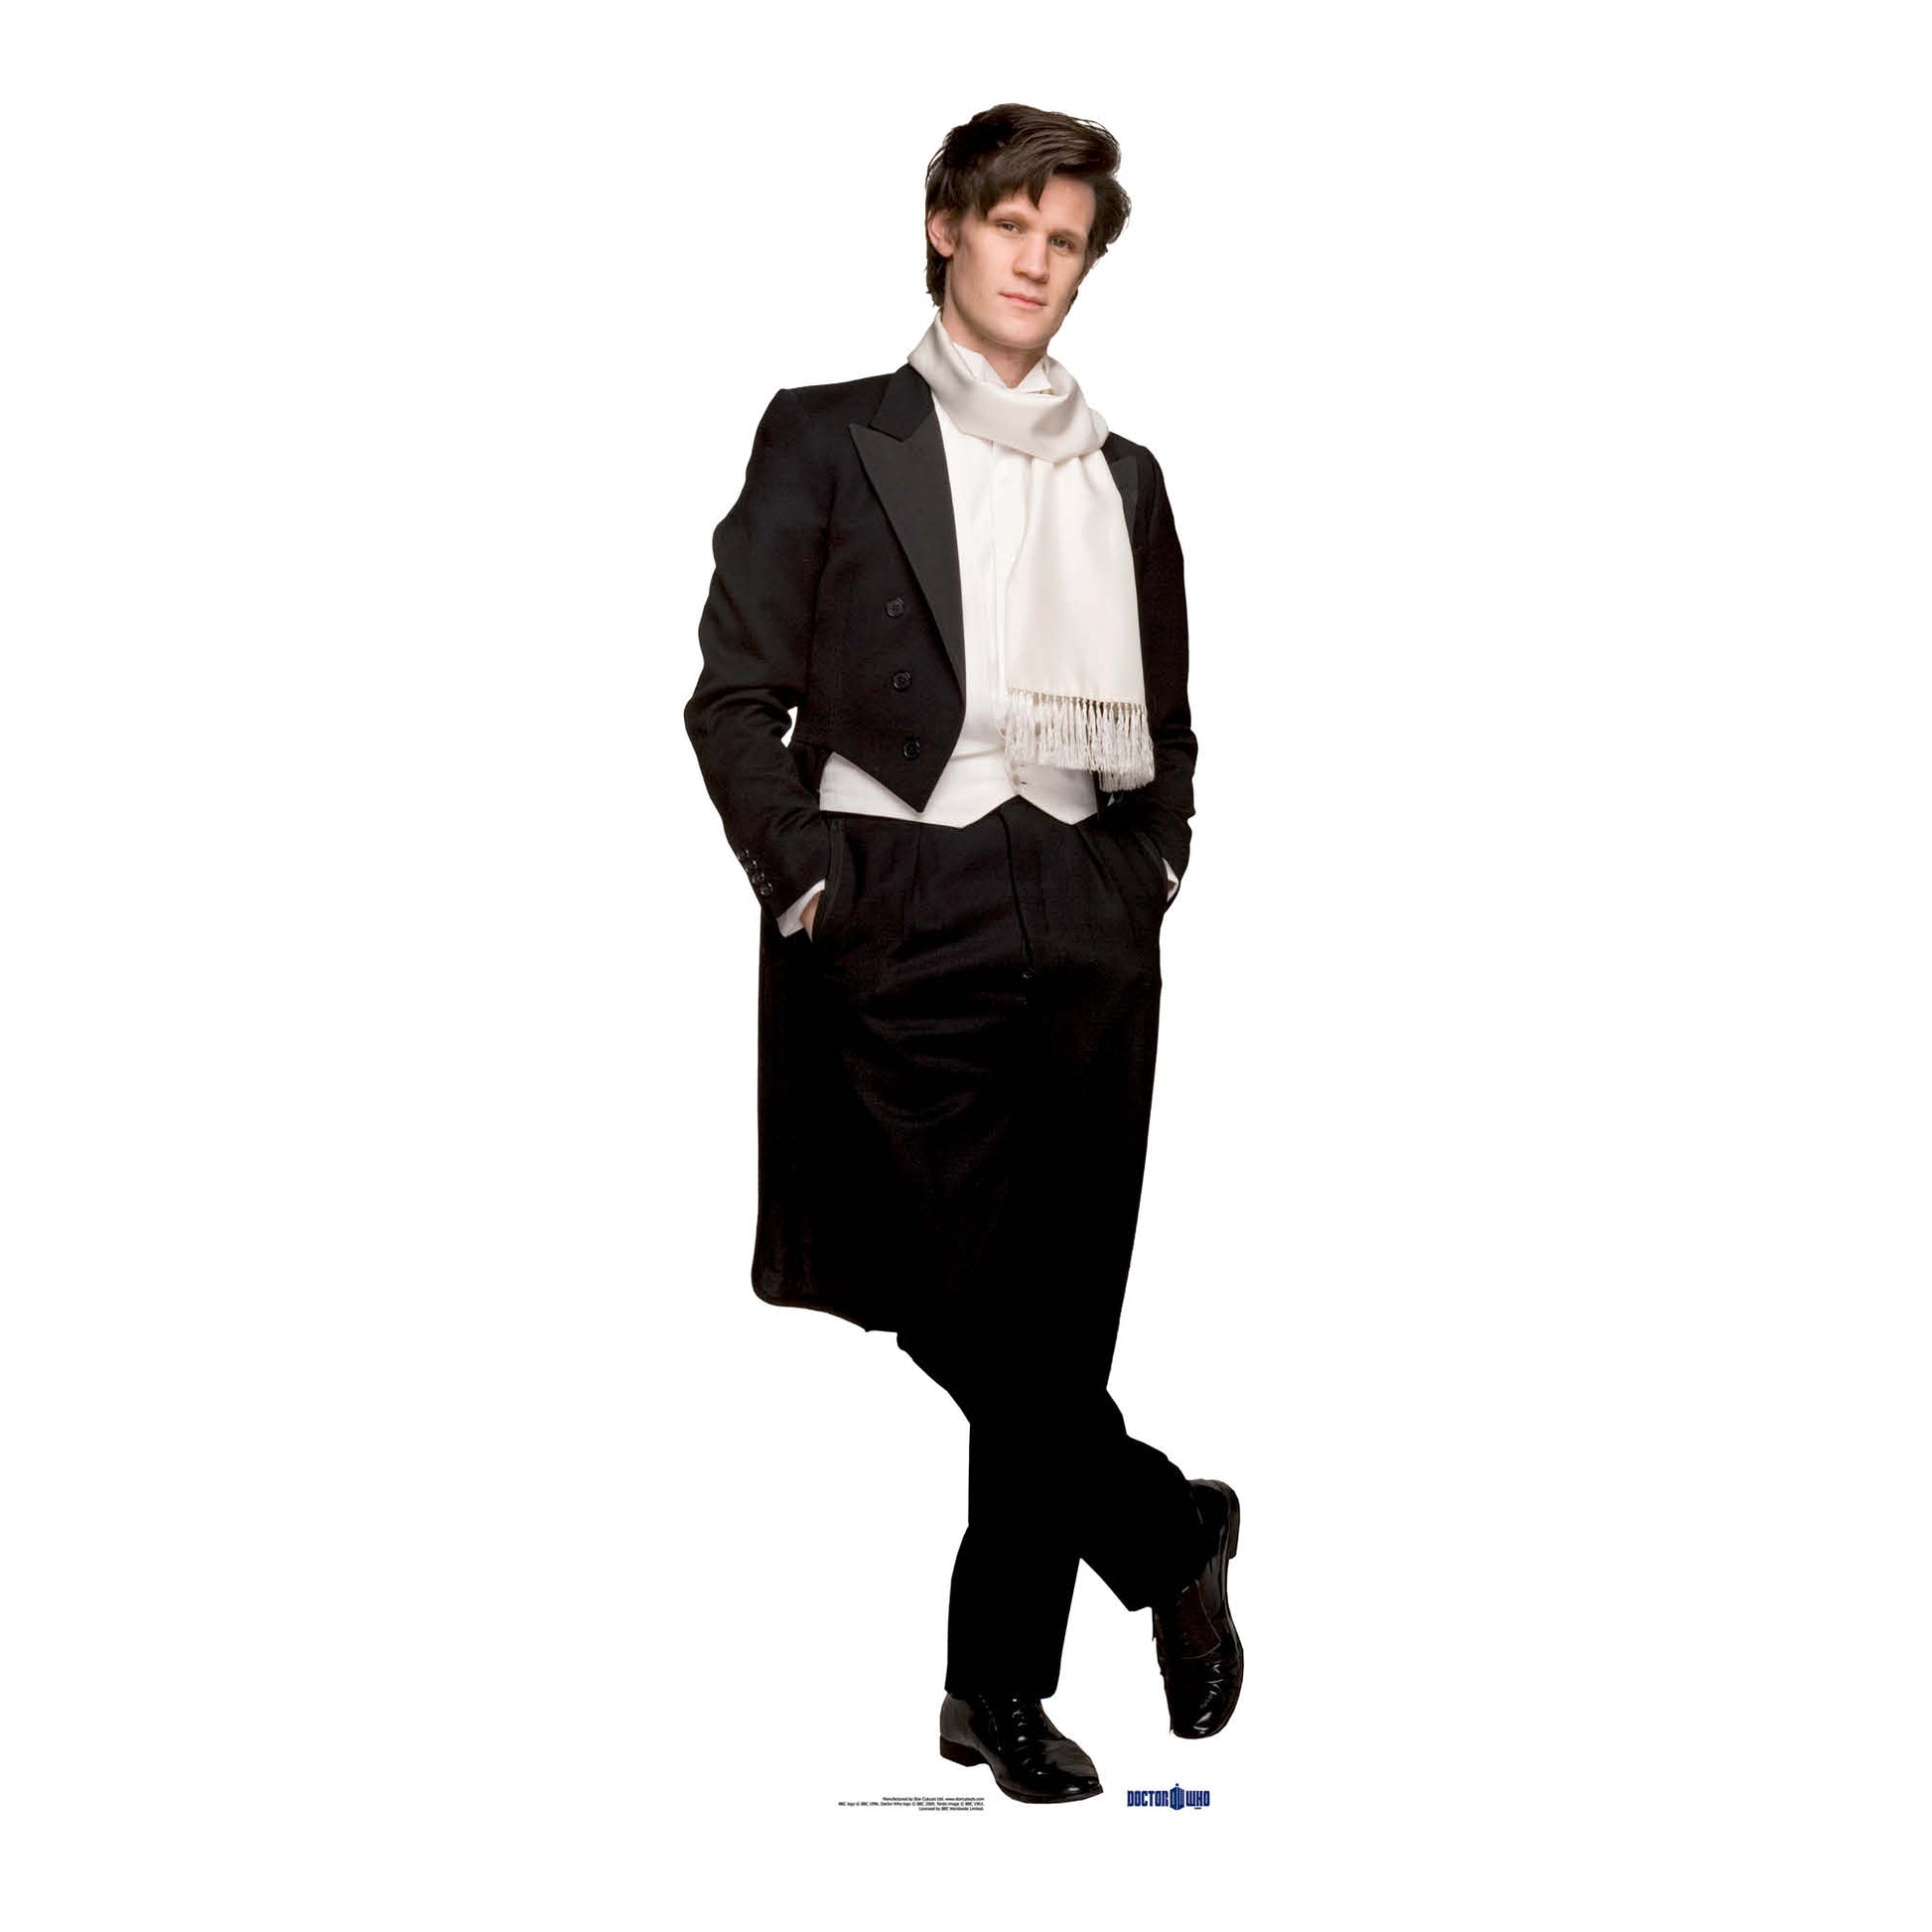 The 11th Doctor - Wedding Suit Matt Smith Cardboard Cut Out Height 180cm - Star Cutouts